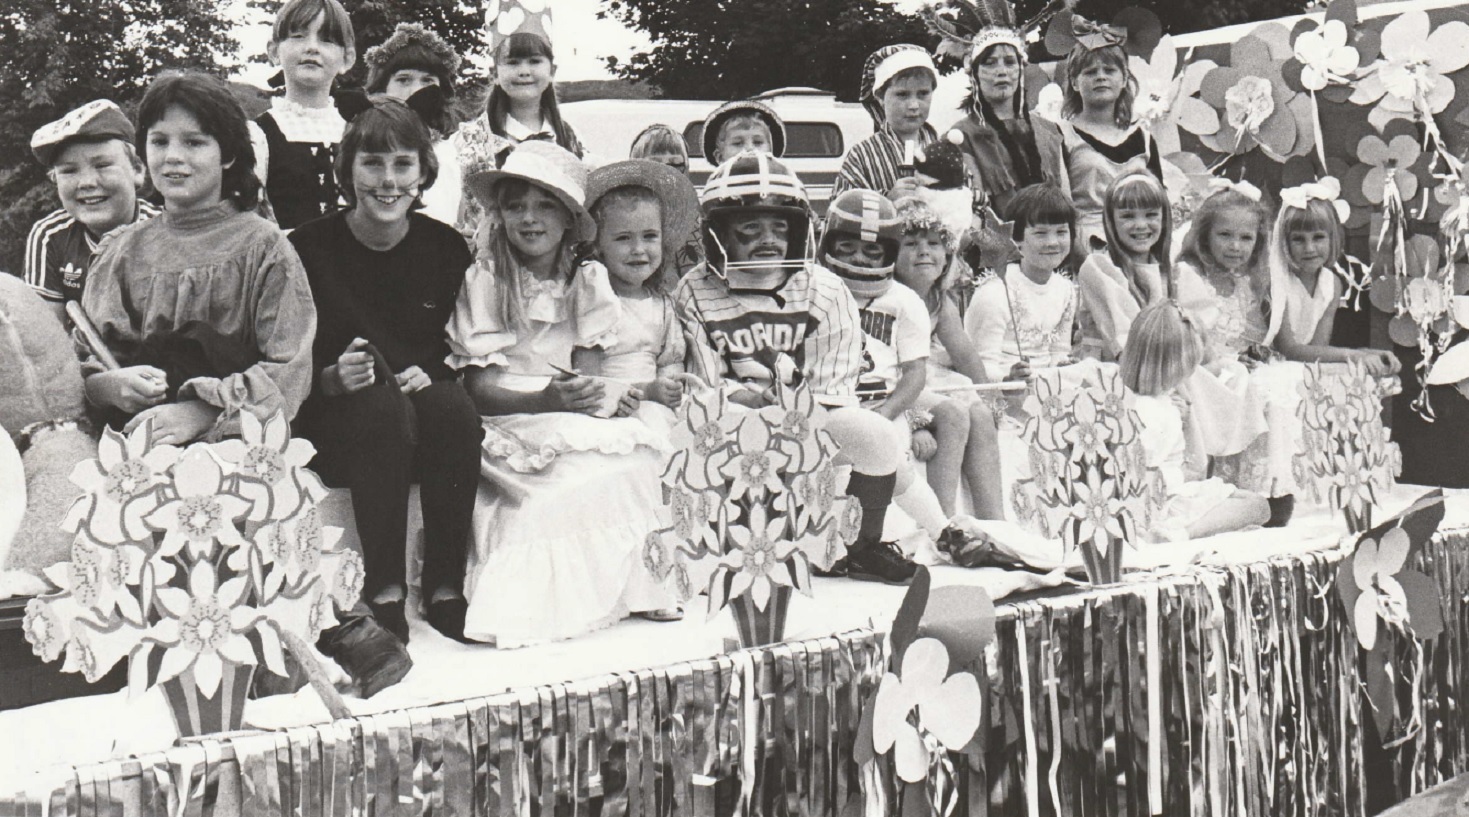 PARADE: There were lots of colourful costumes and smiling faces on board the ‘Ambleside Kids’ float at Ambleside Gala in 1987